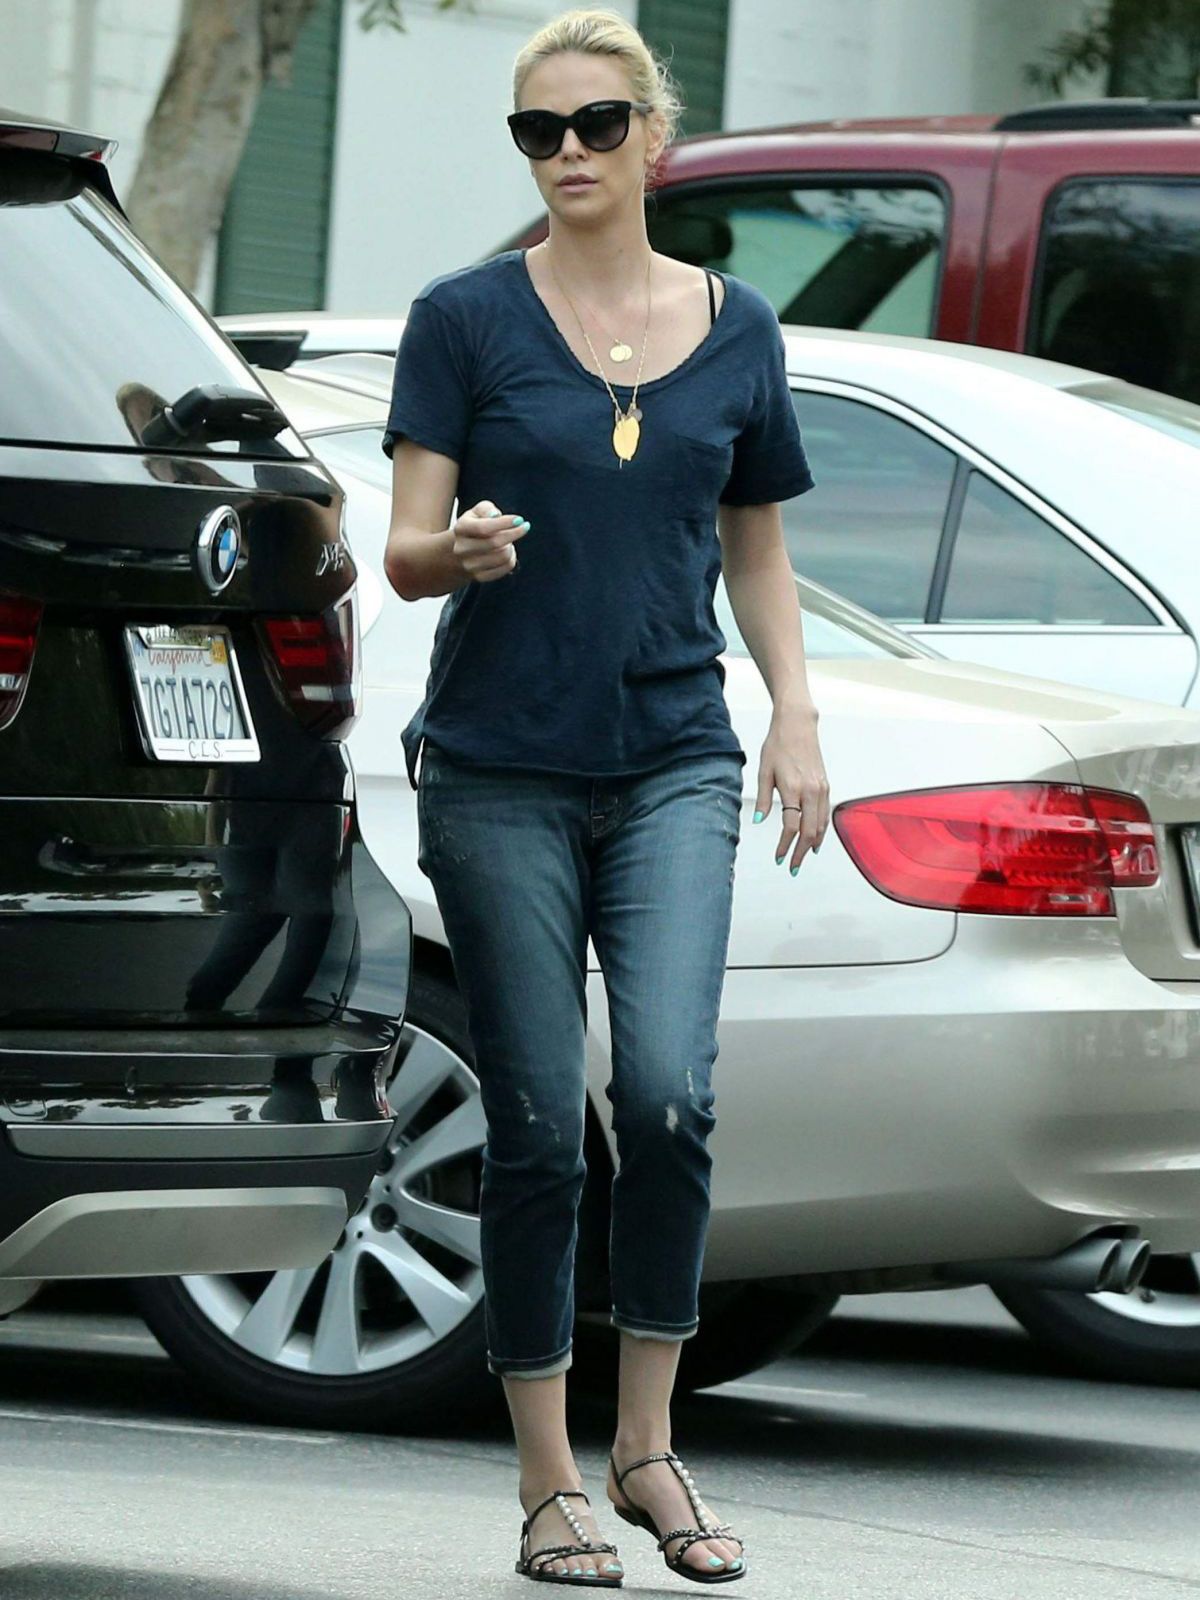 Charlize Theron With Her 2016 BMW X5 